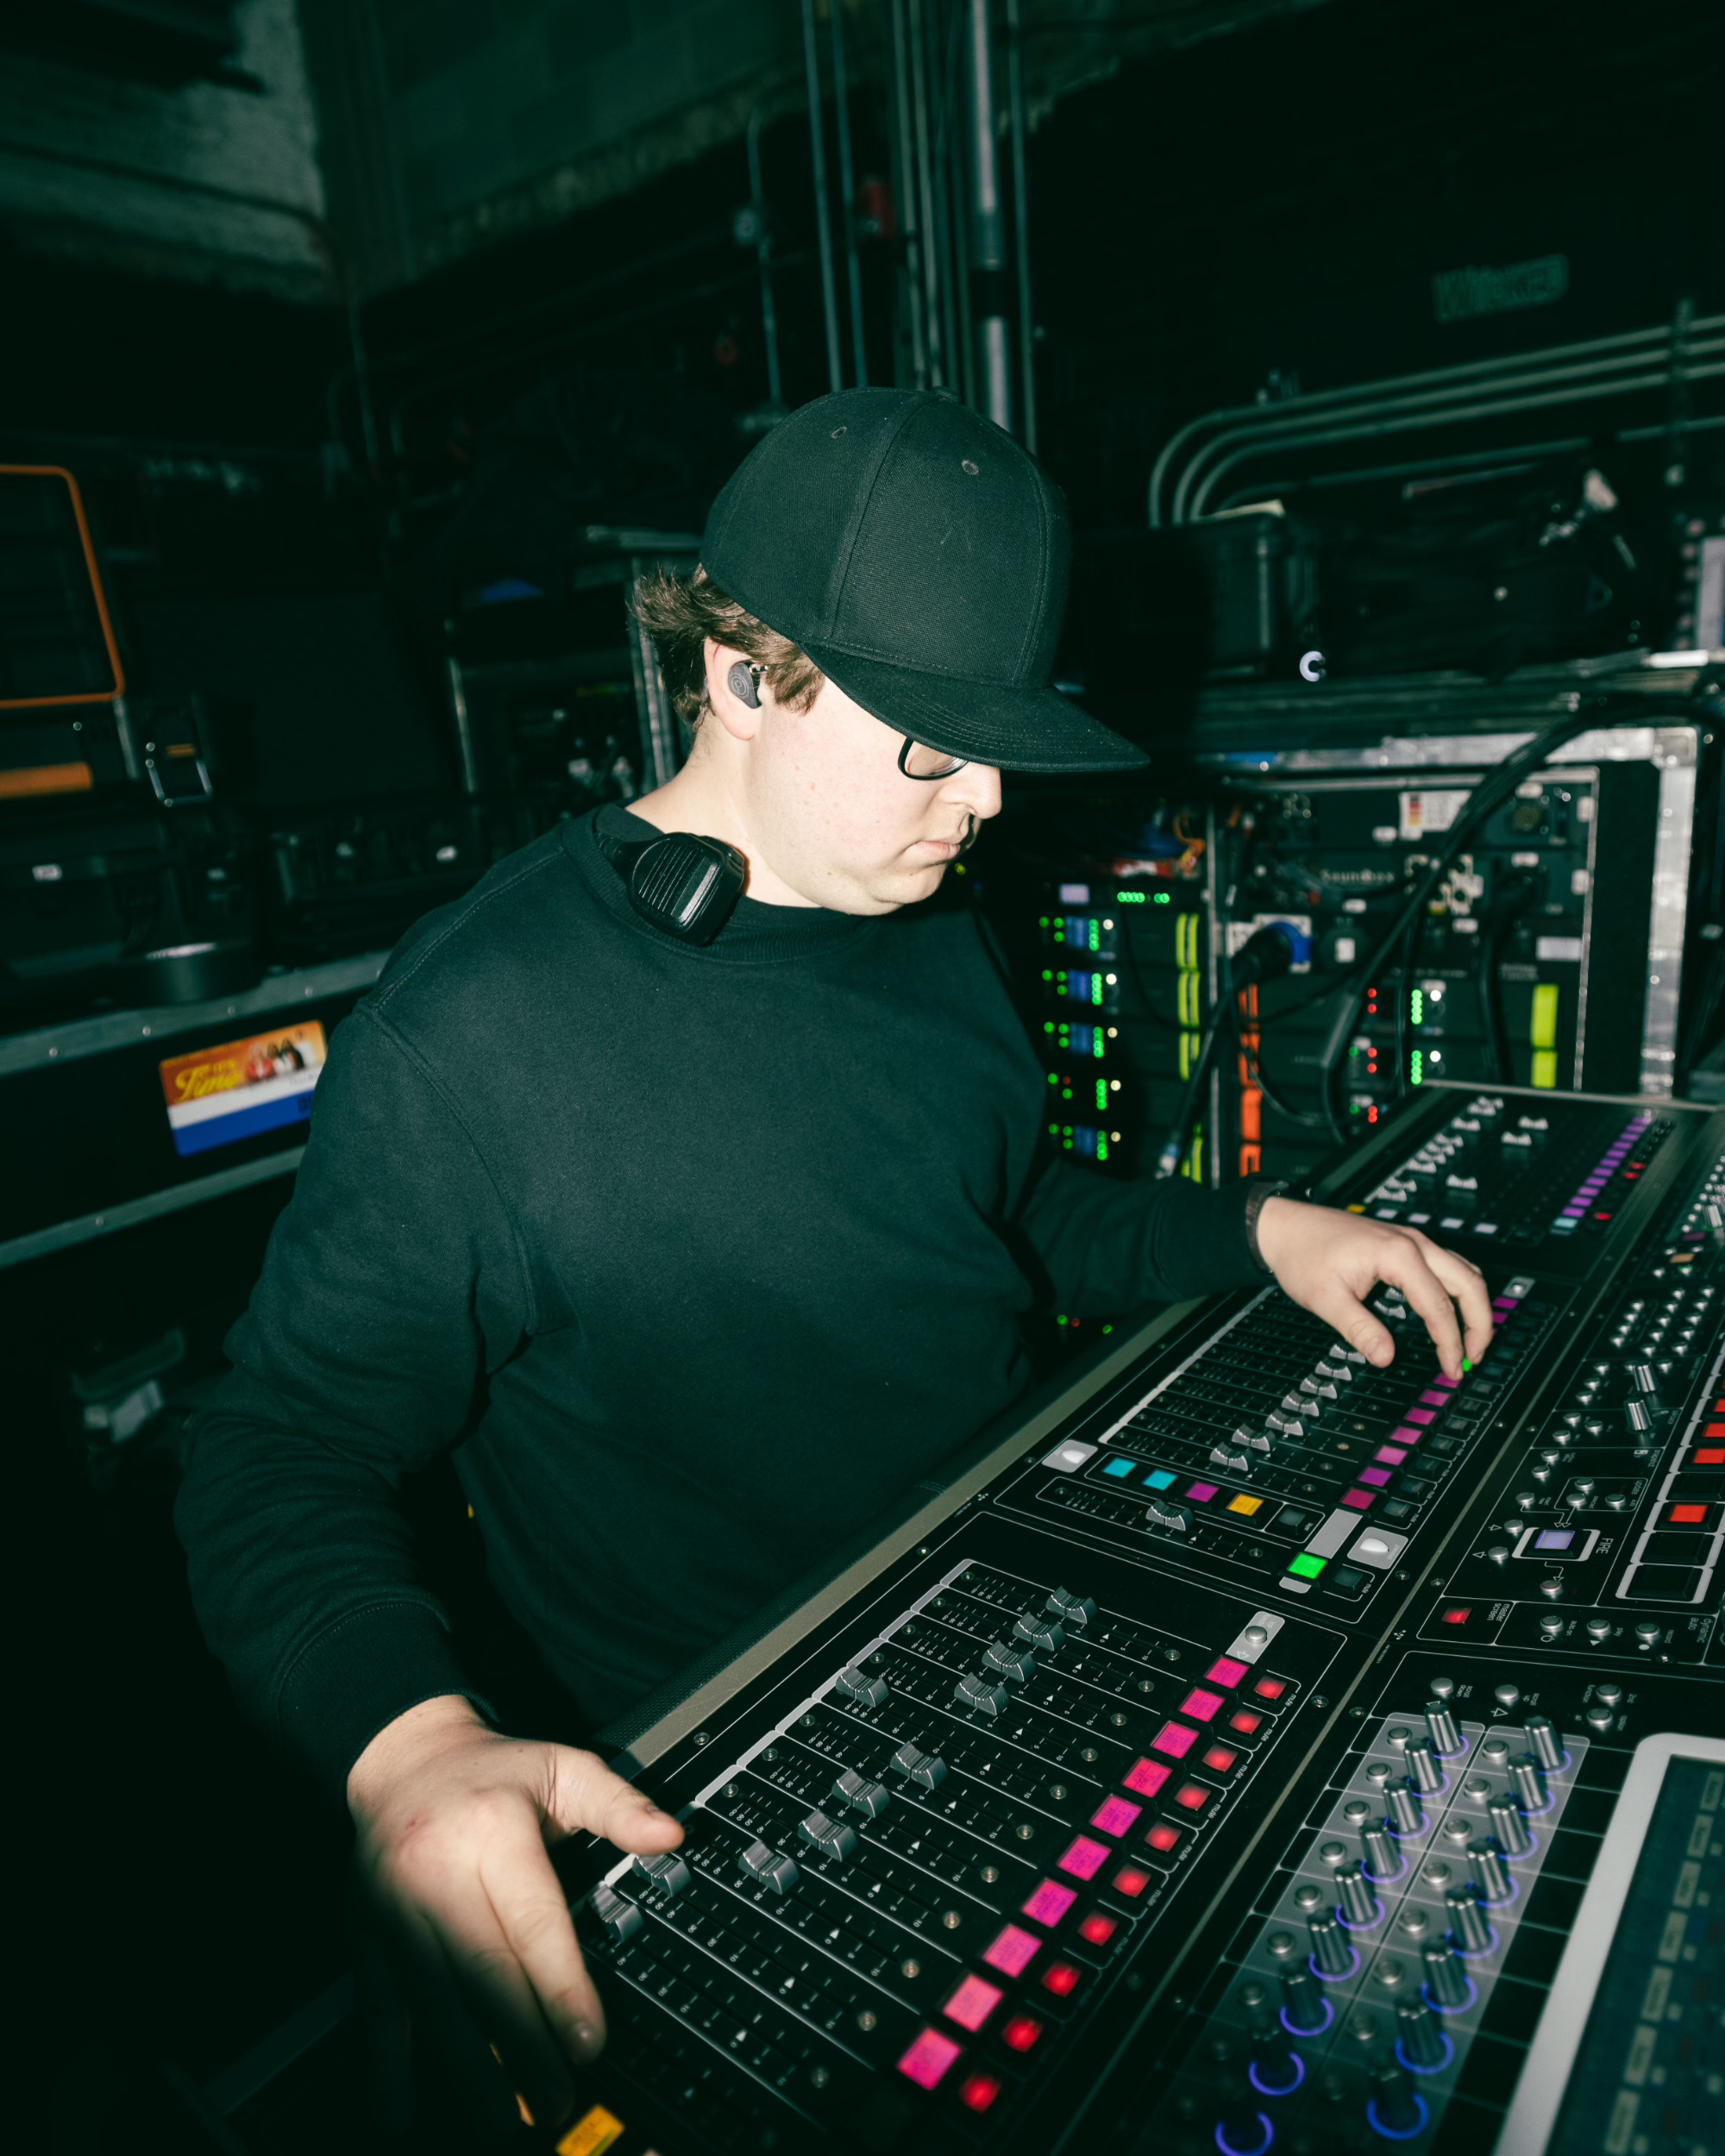 James Bundy wearing IEMs and dressed in black adjusting controls on a mixing board.